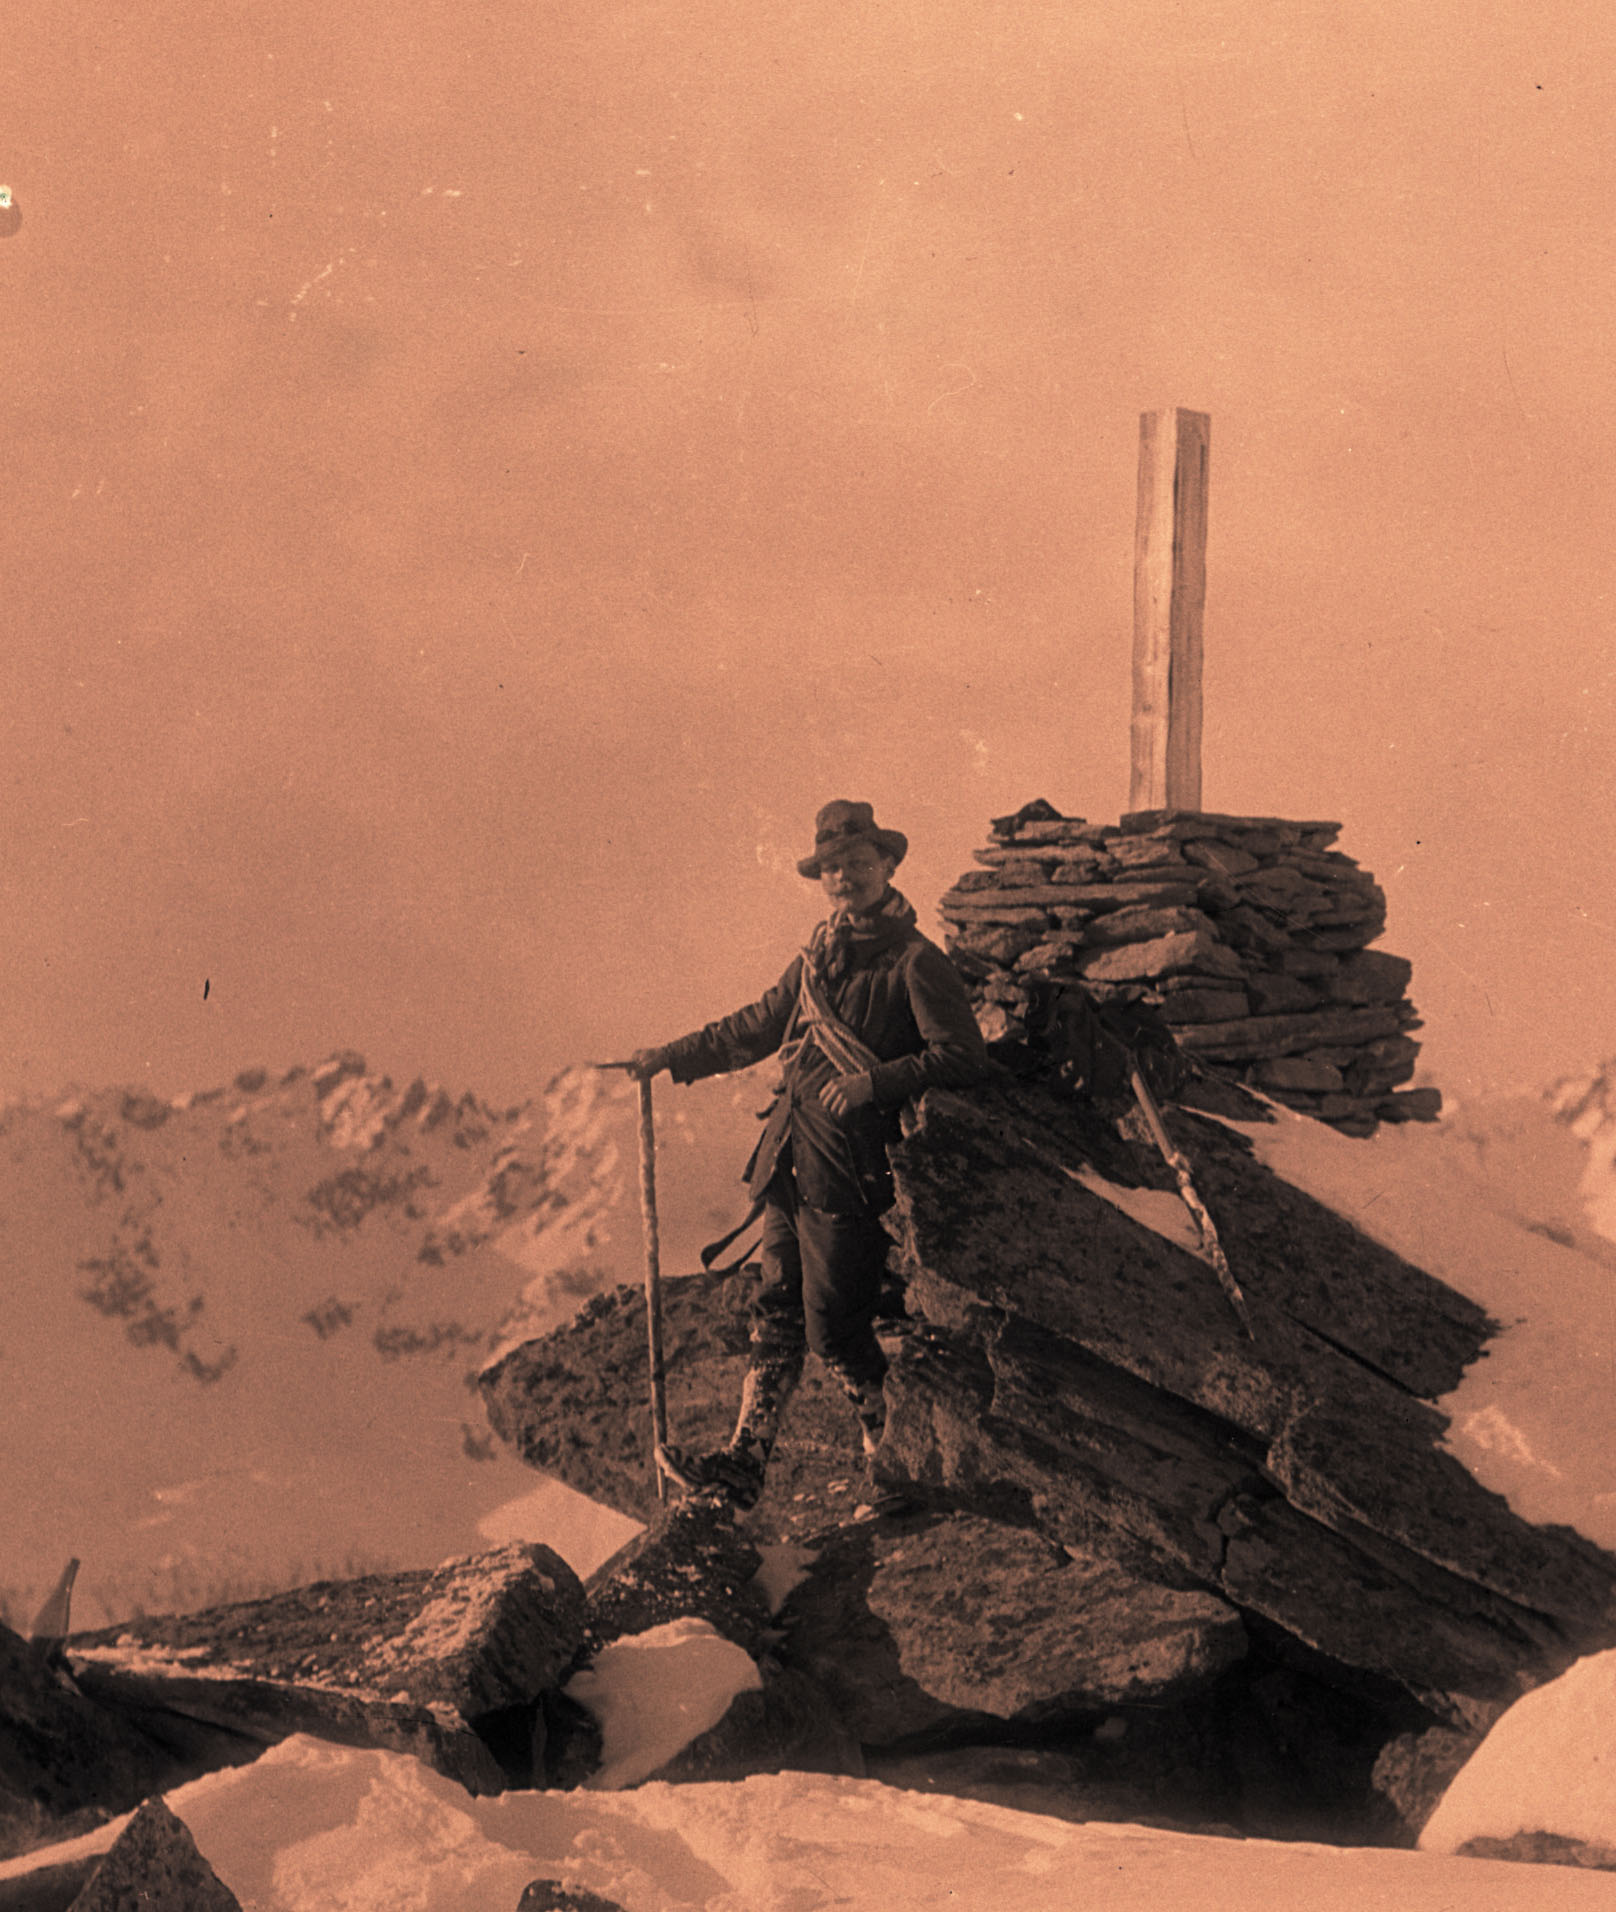  Andrew James Gilmour posing with an ice axe on a summit. 